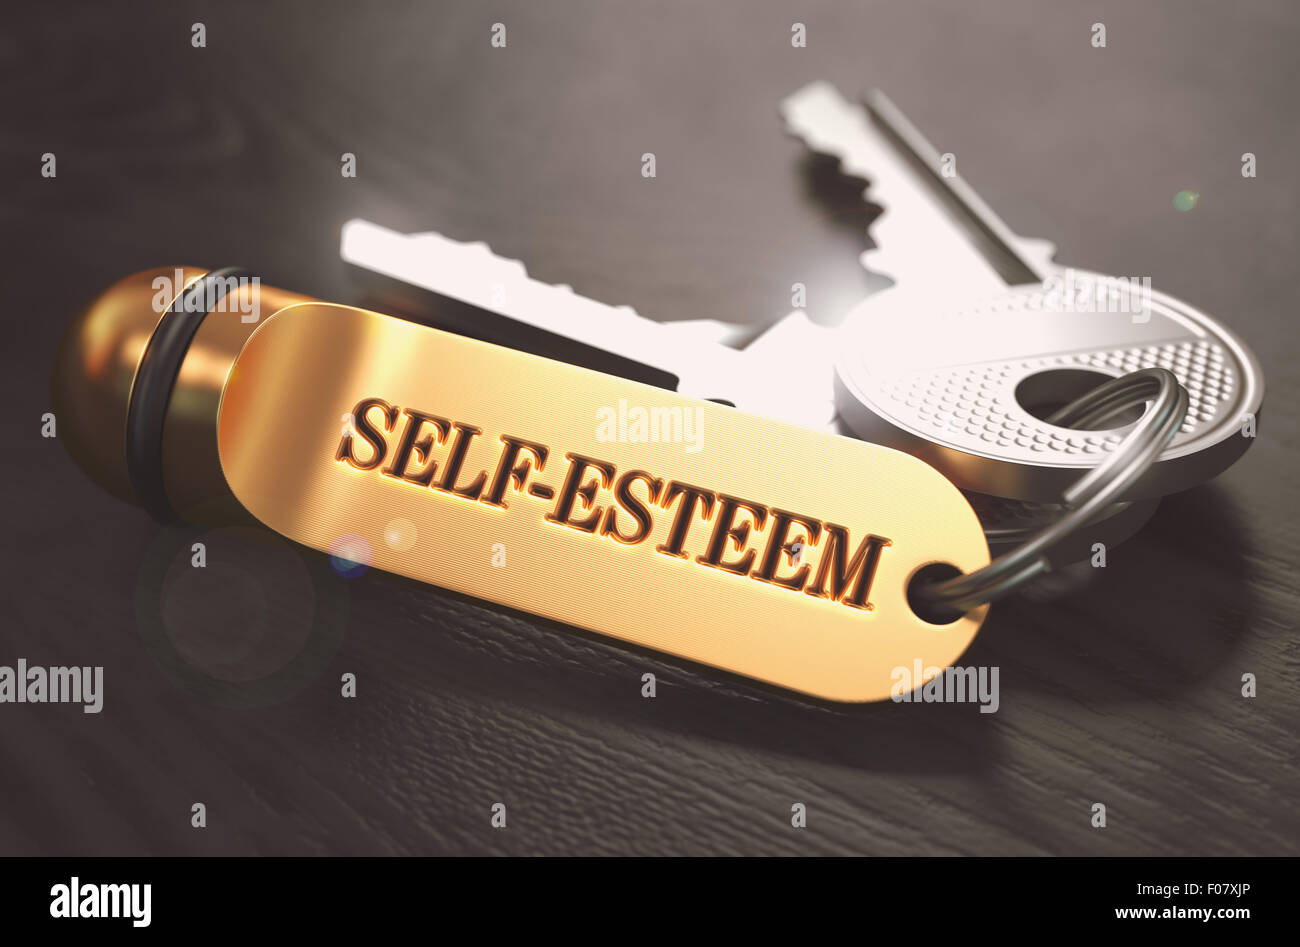 Self-Esteem - Bunch of Keys with Text on Golden Keychain. Stock Photo